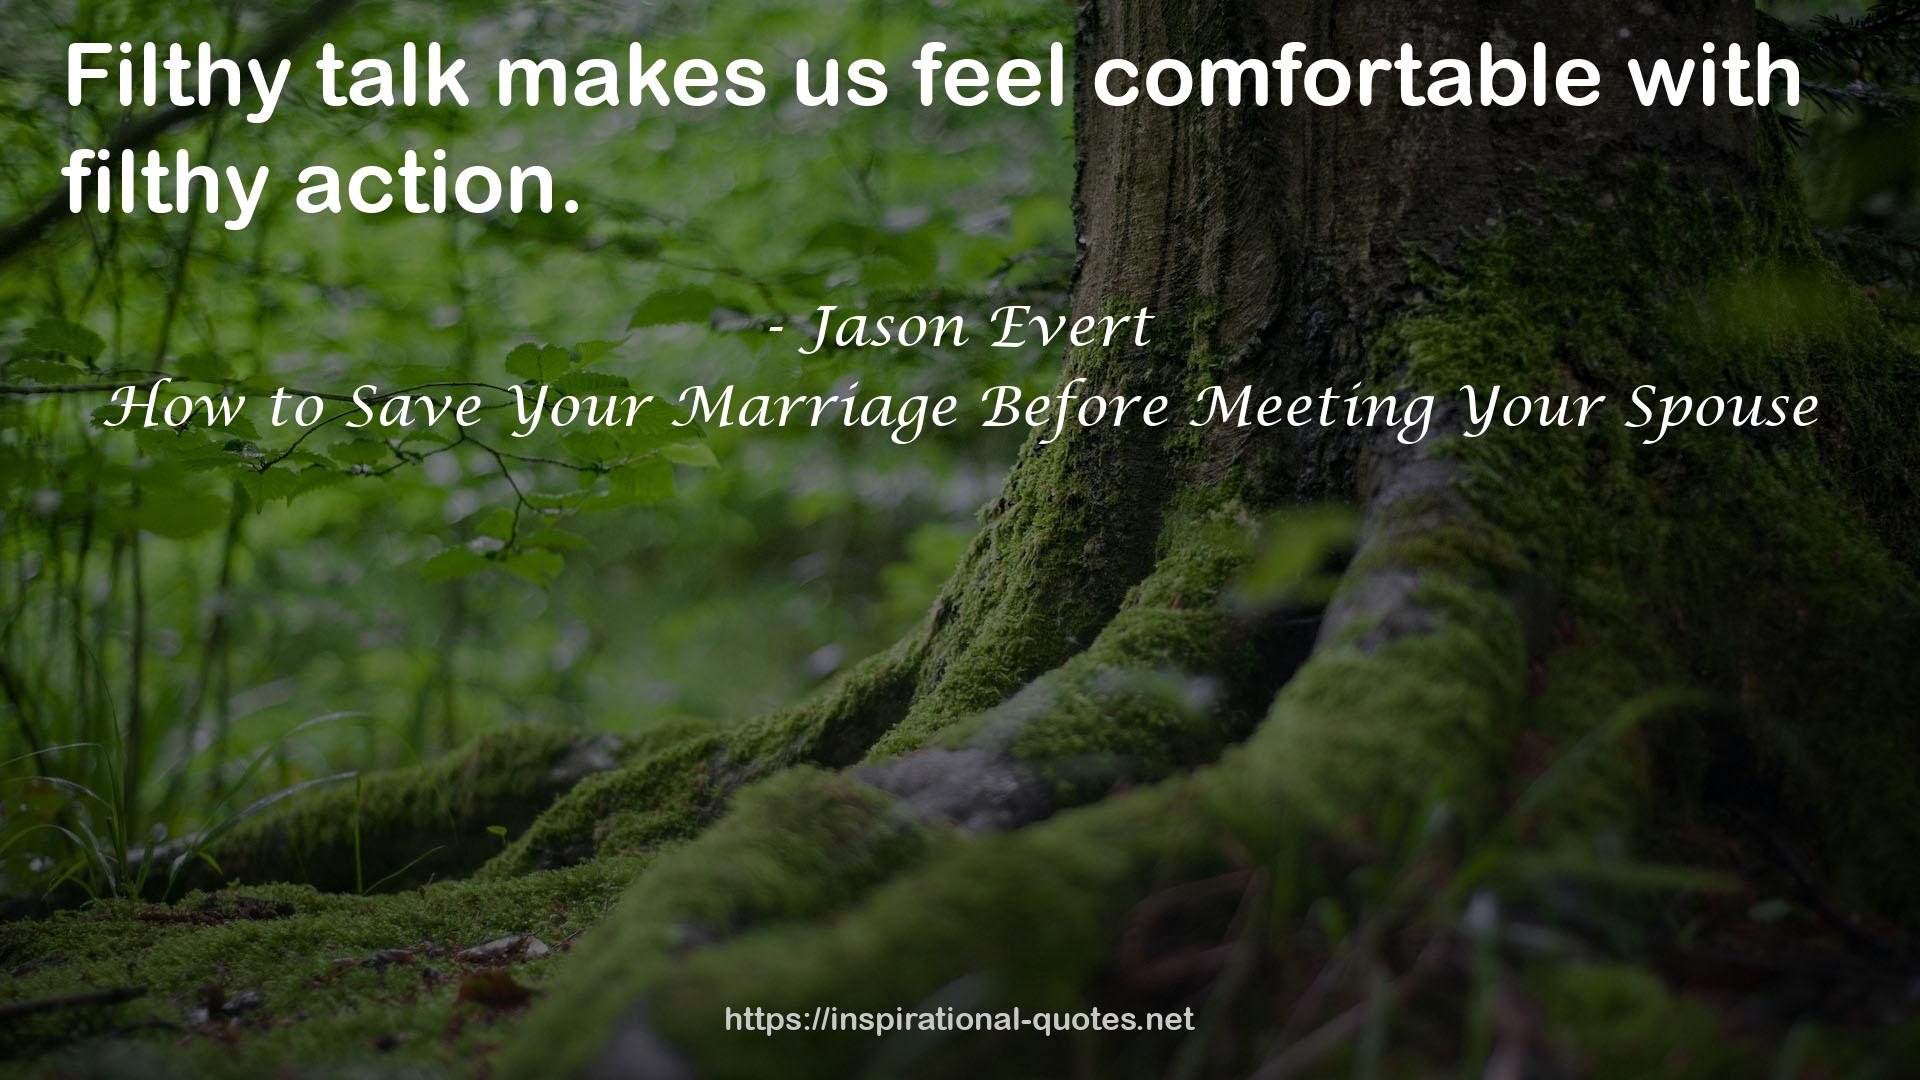 How to Save Your Marriage Before Meeting Your Spouse QUOTES